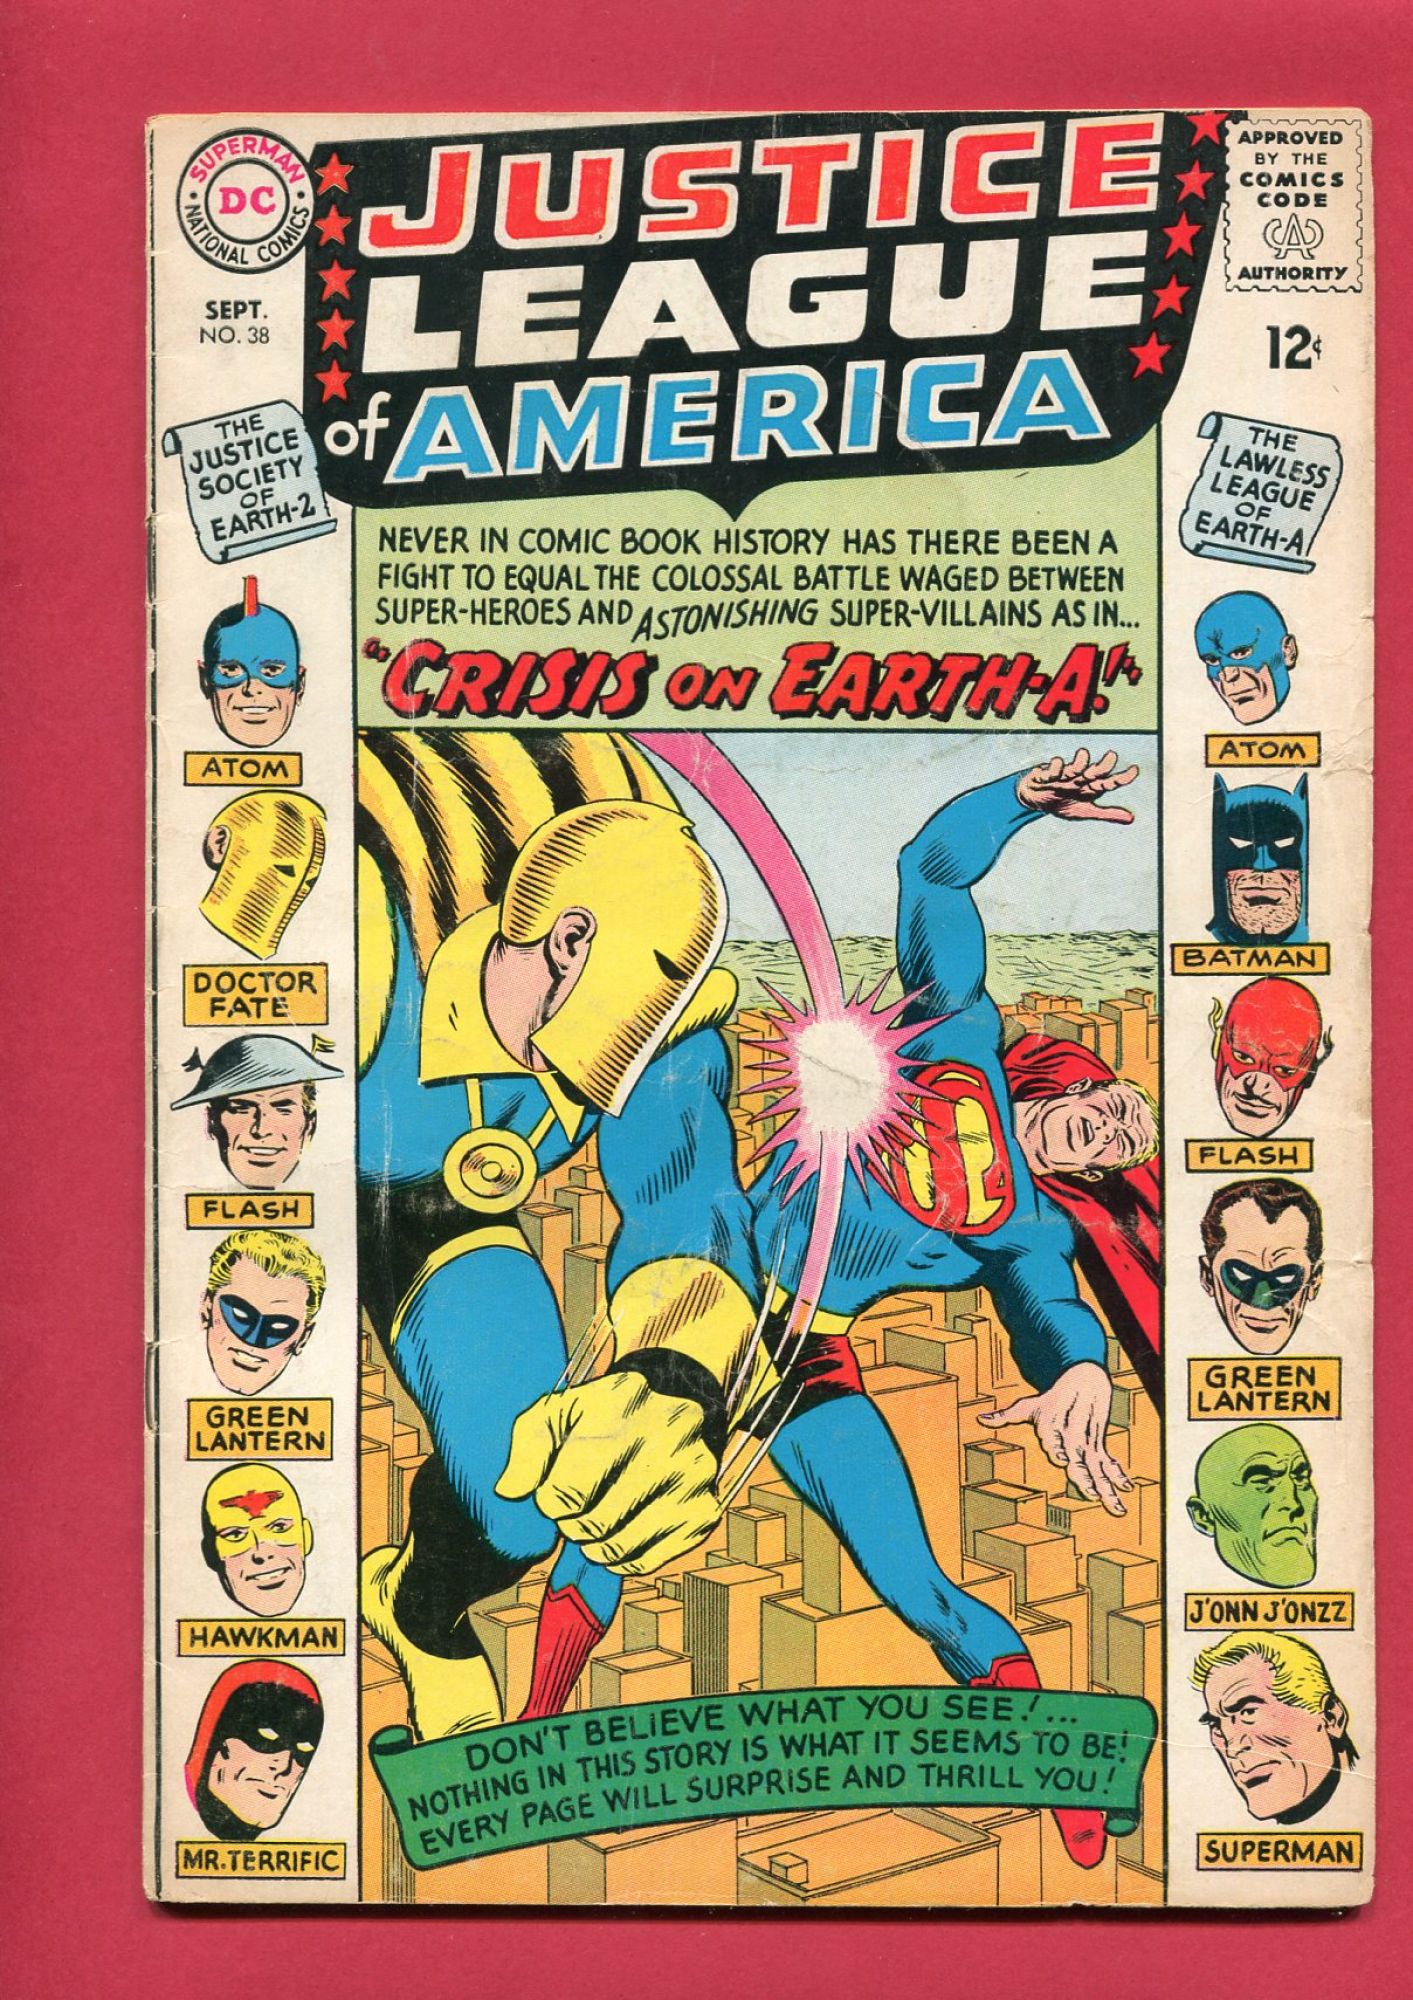 Justice League of America #38, Sep 1965, 4.5 VG+